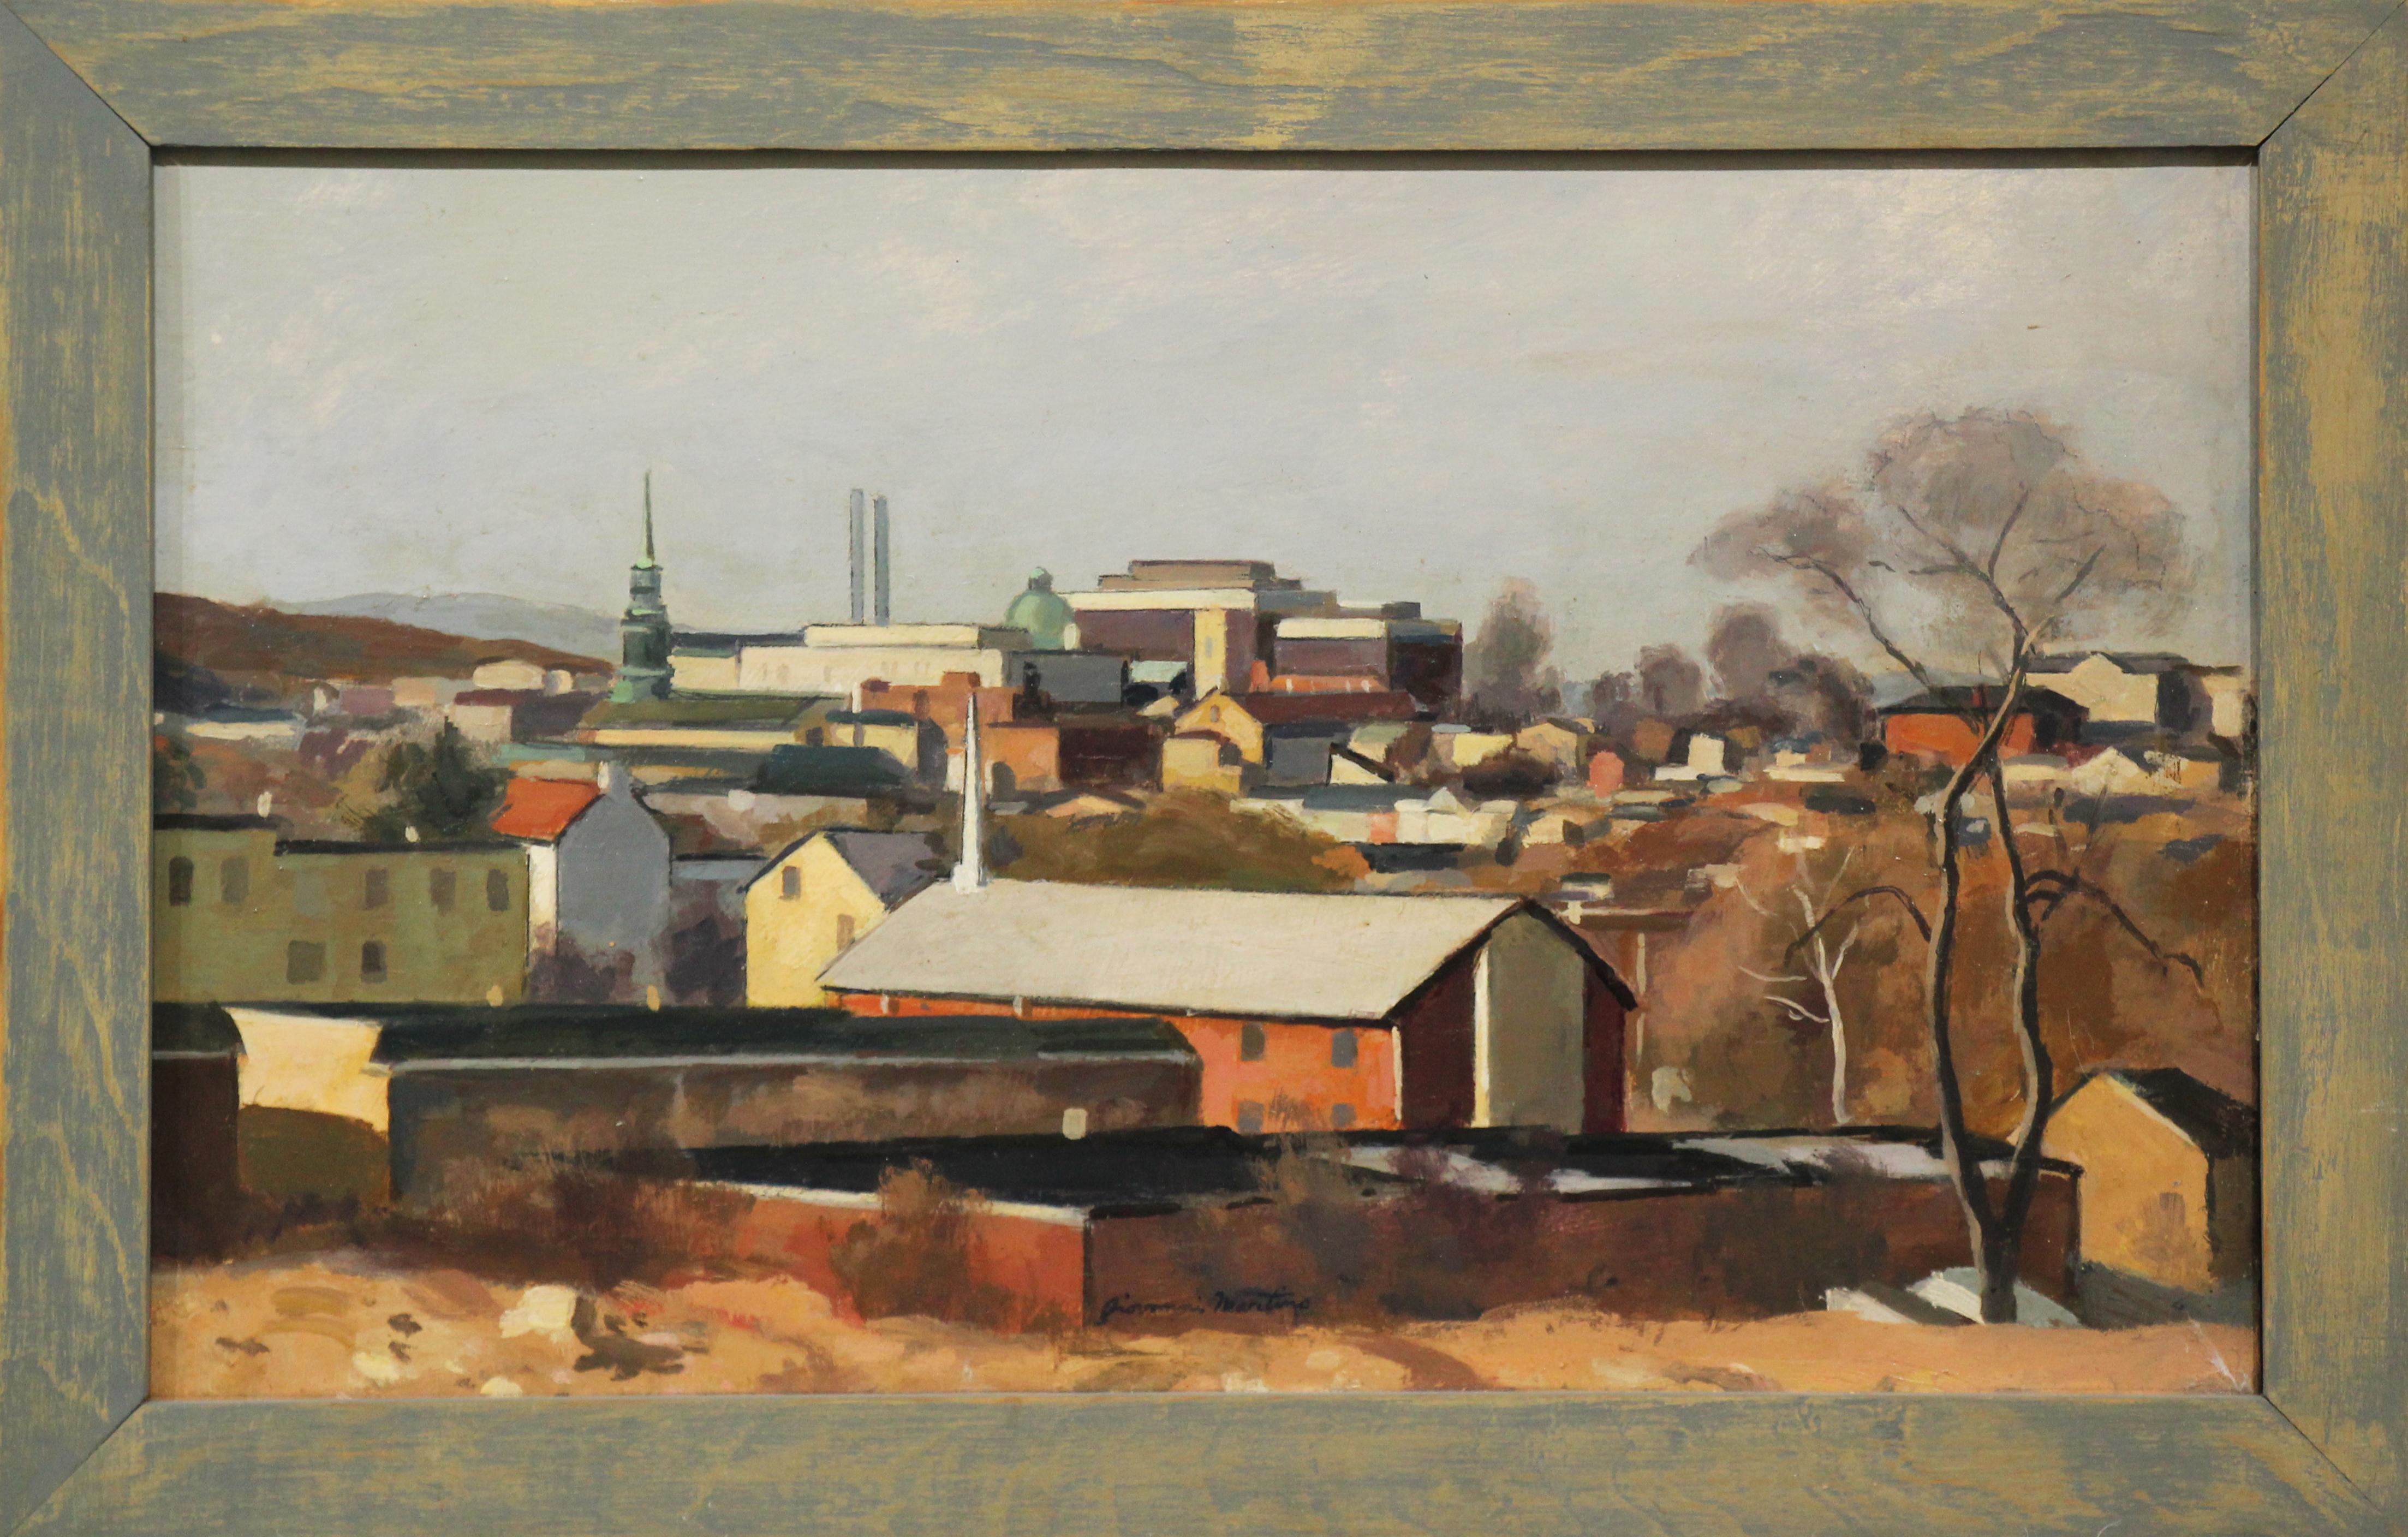 Tremont and Fornace, Regional American Cityscape by Pennsylvania Impressionist - Painting by Giovanni Martino